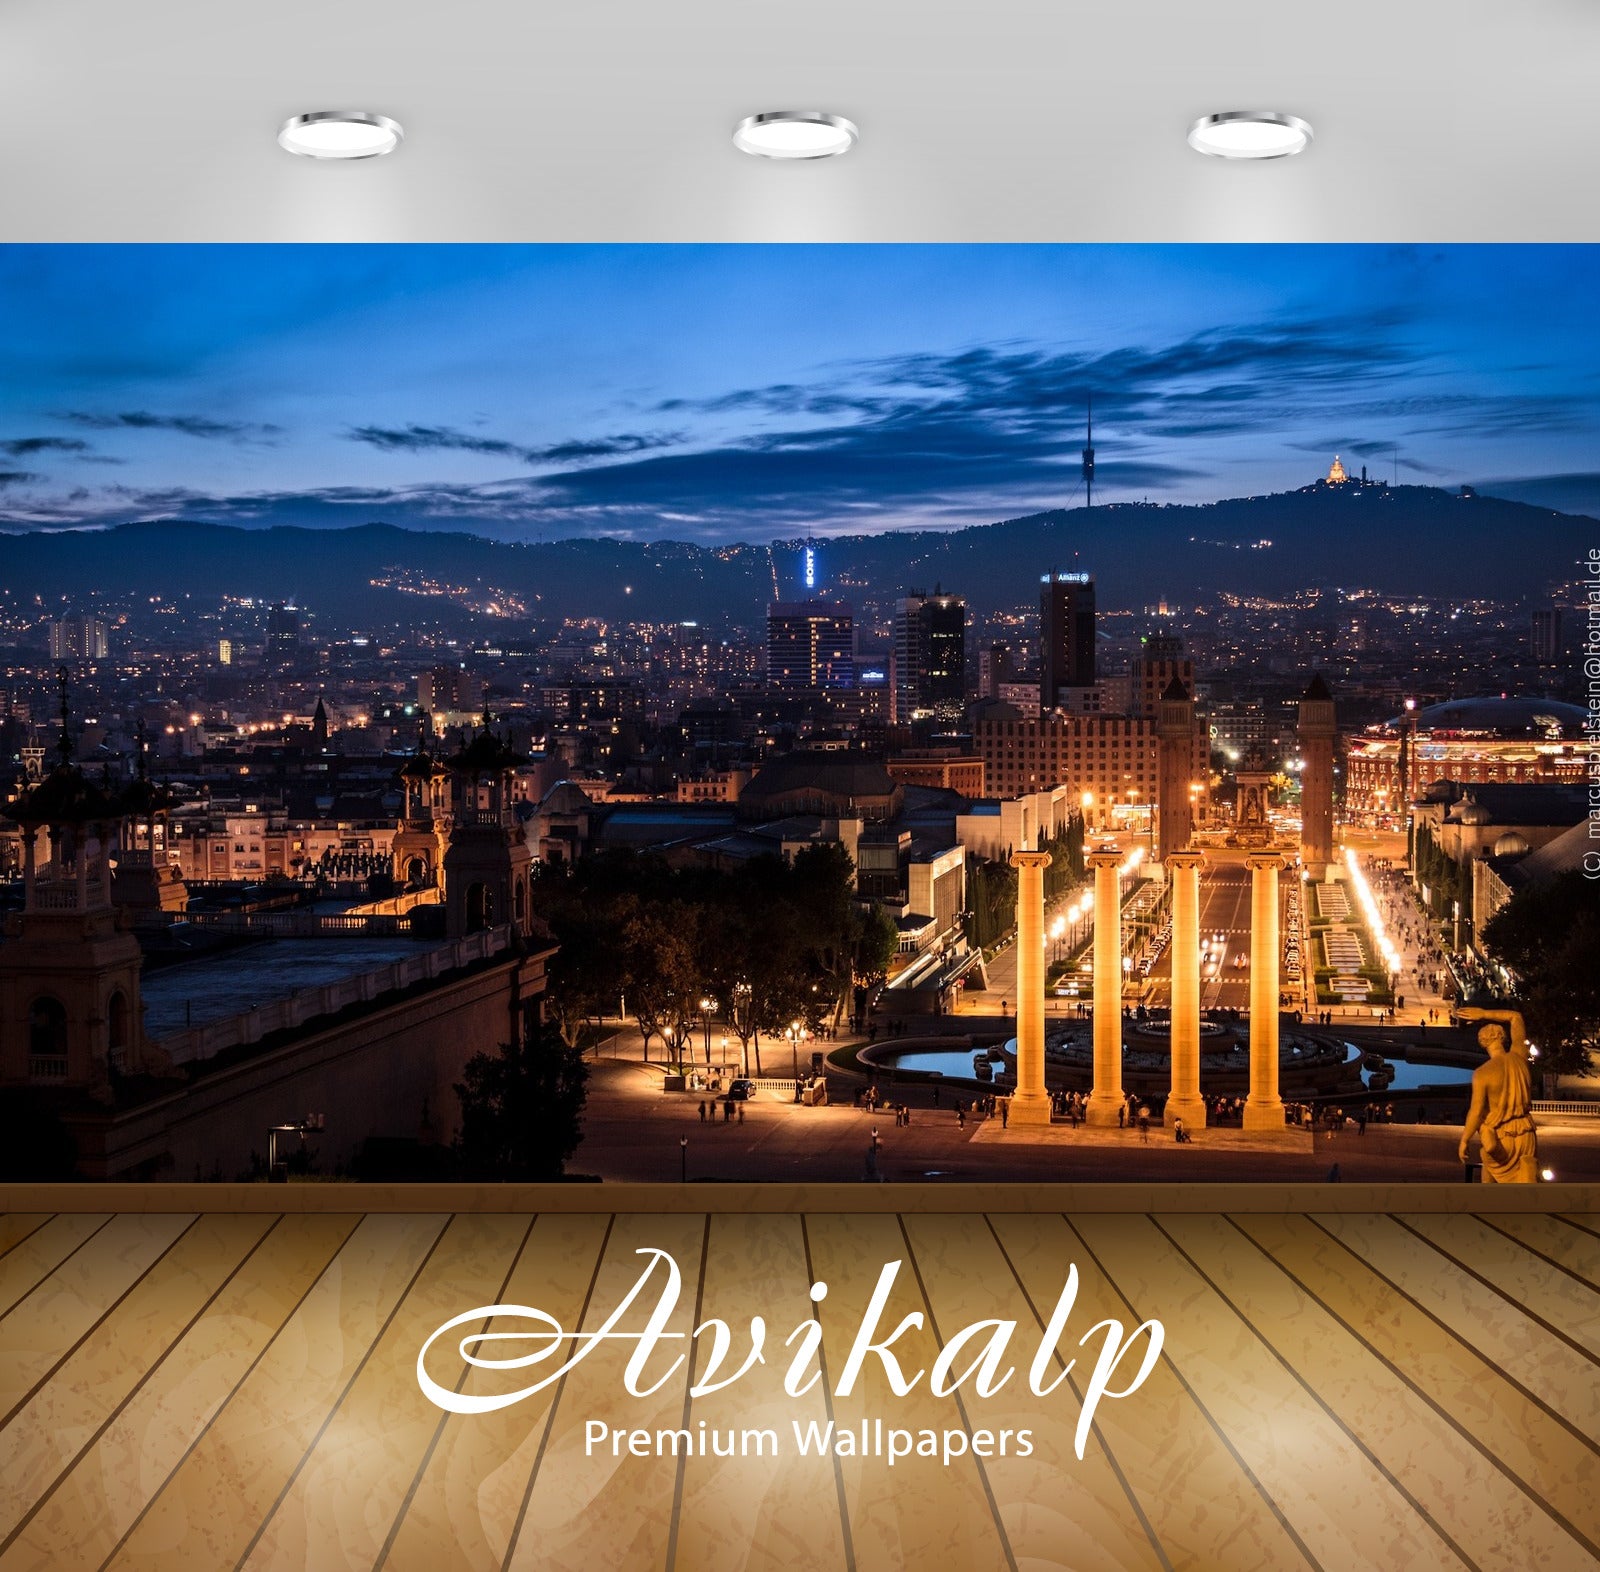 Avikalp Exclusive Awi1621 Barcelona City View Full HD Wallpapers for Living room, Hall, Kids Room, K